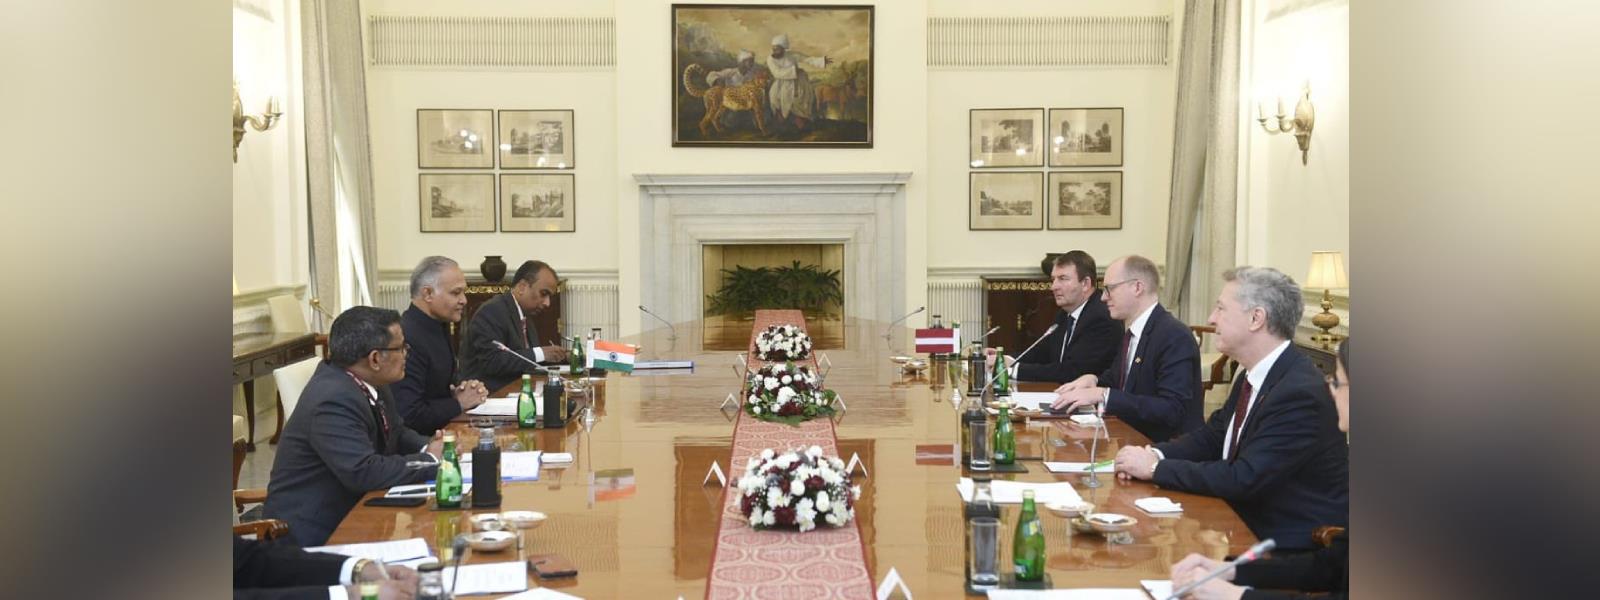 8th India-Latvia Foreign Office Consultation held in New Delhi